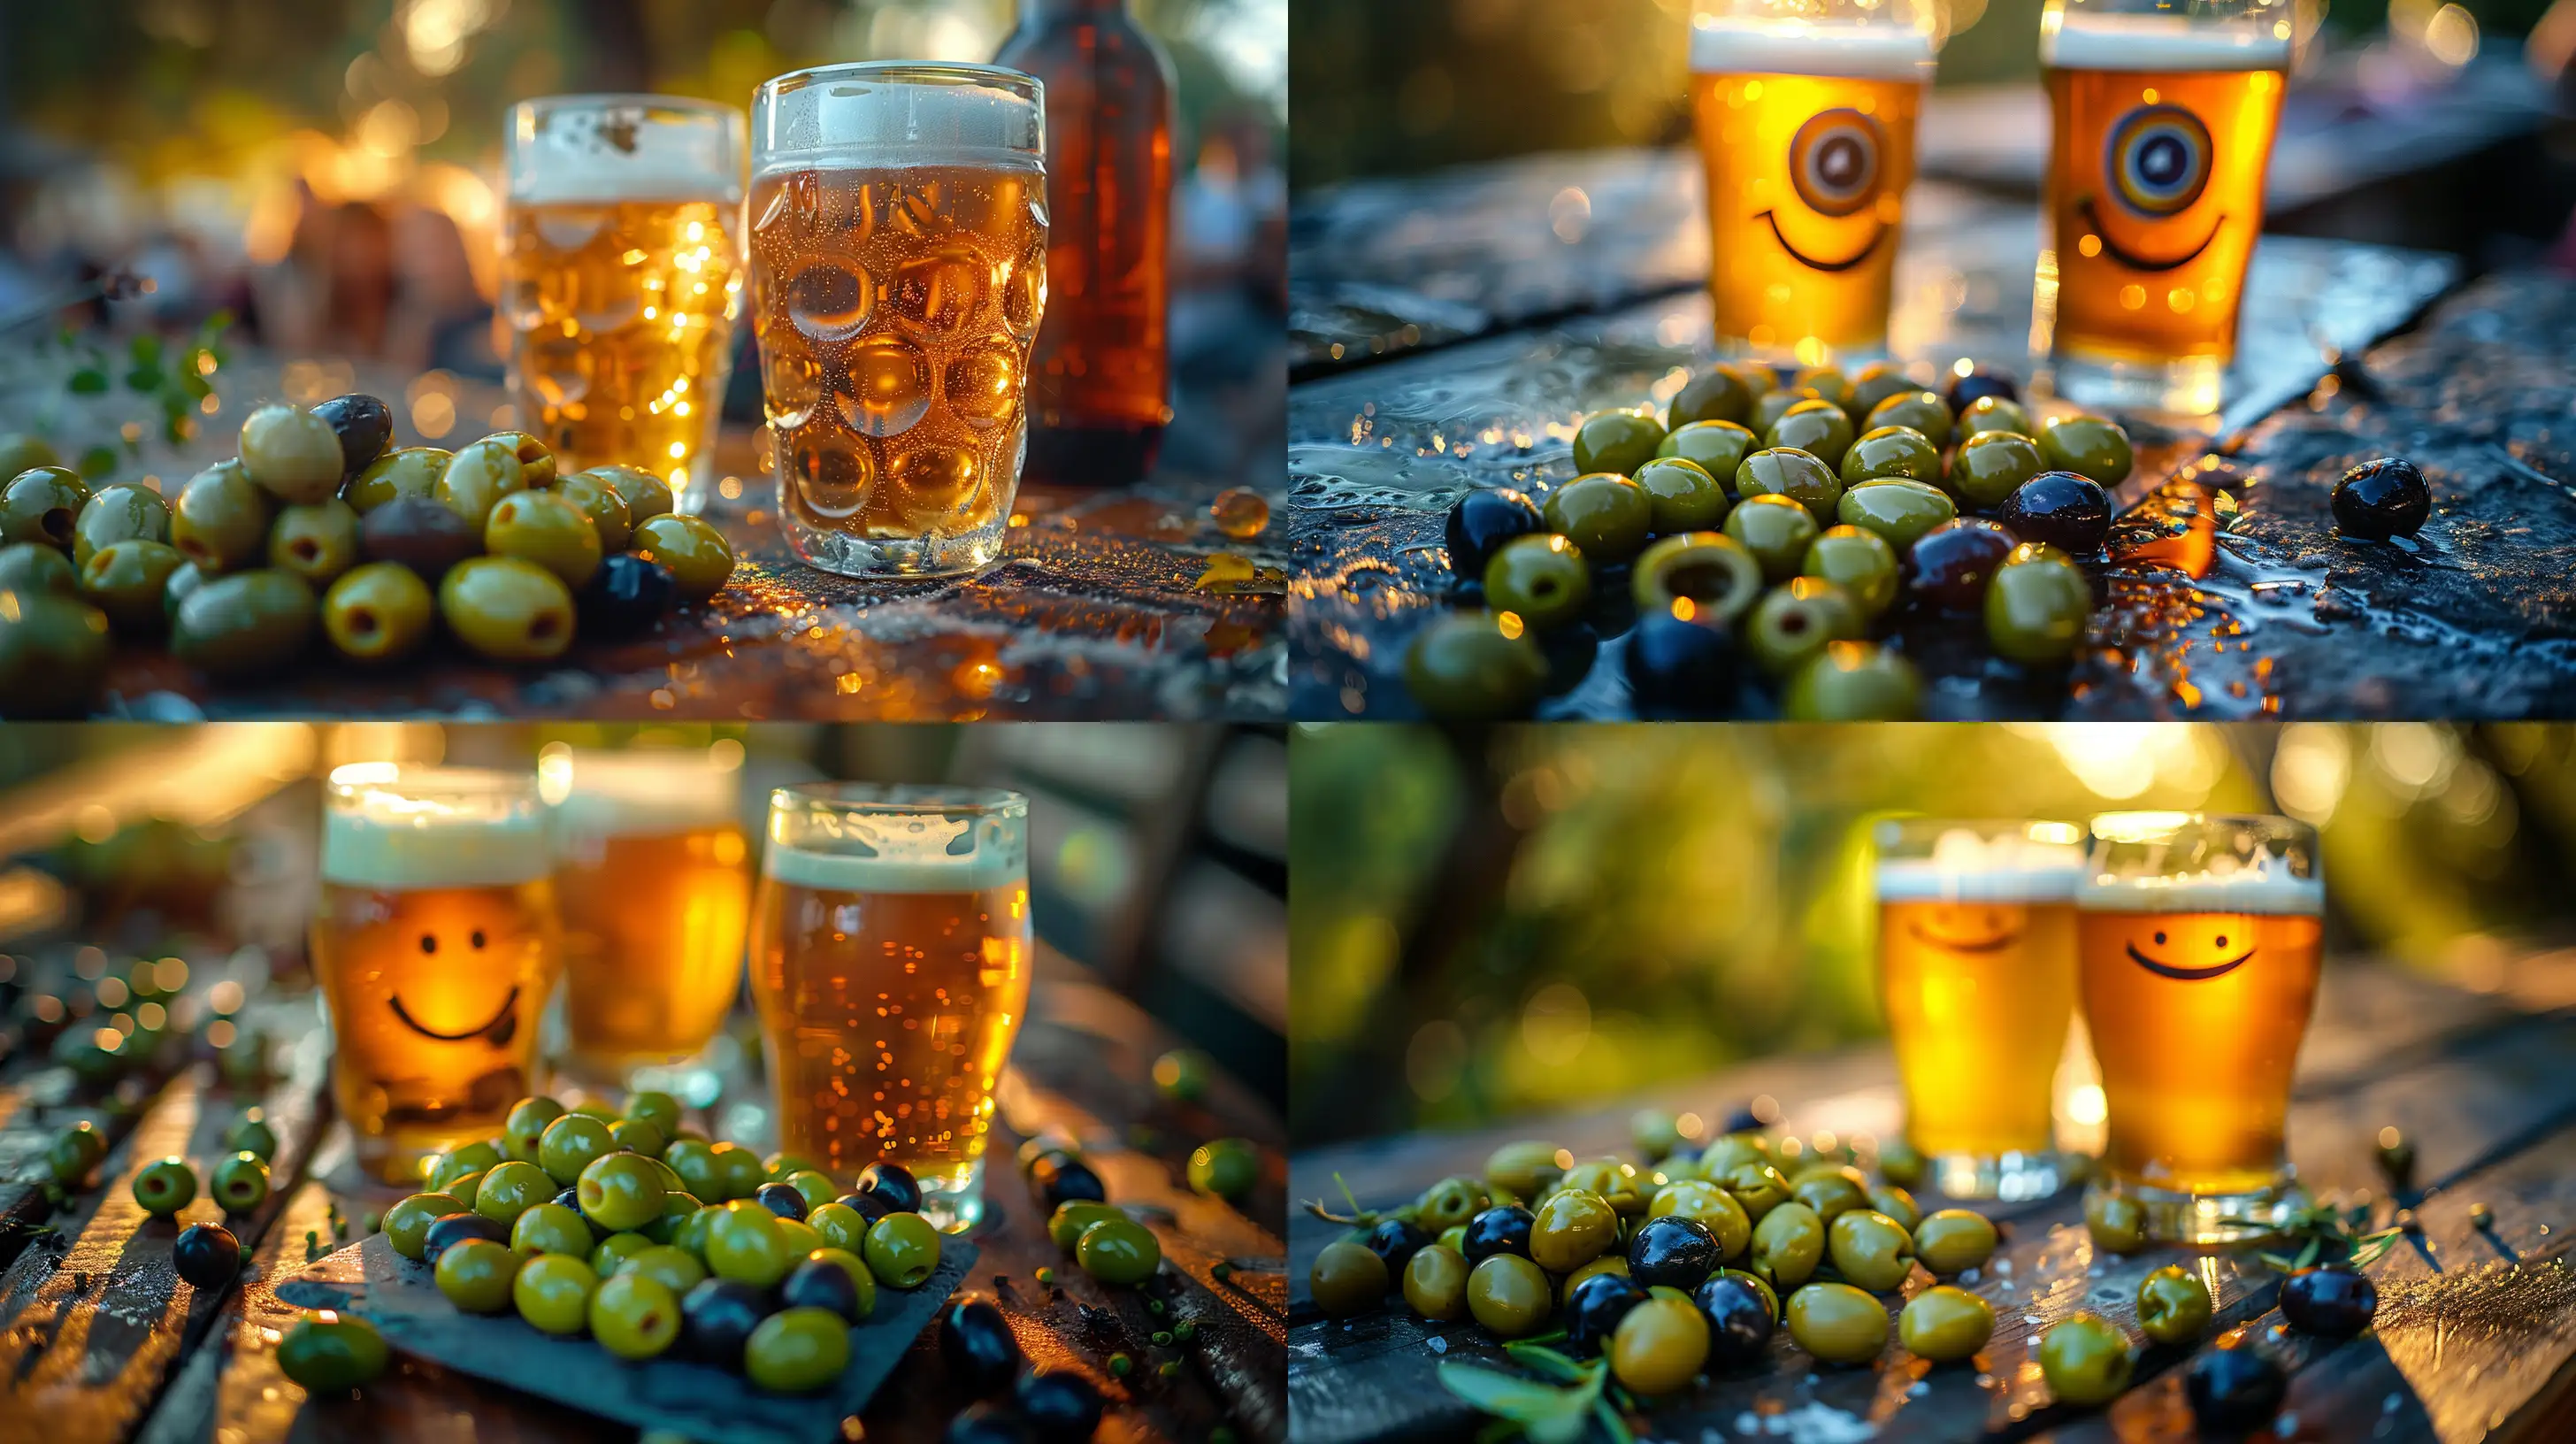 Smiling-Olive-Aperitif-and-Beers-on-Summer-Terrace